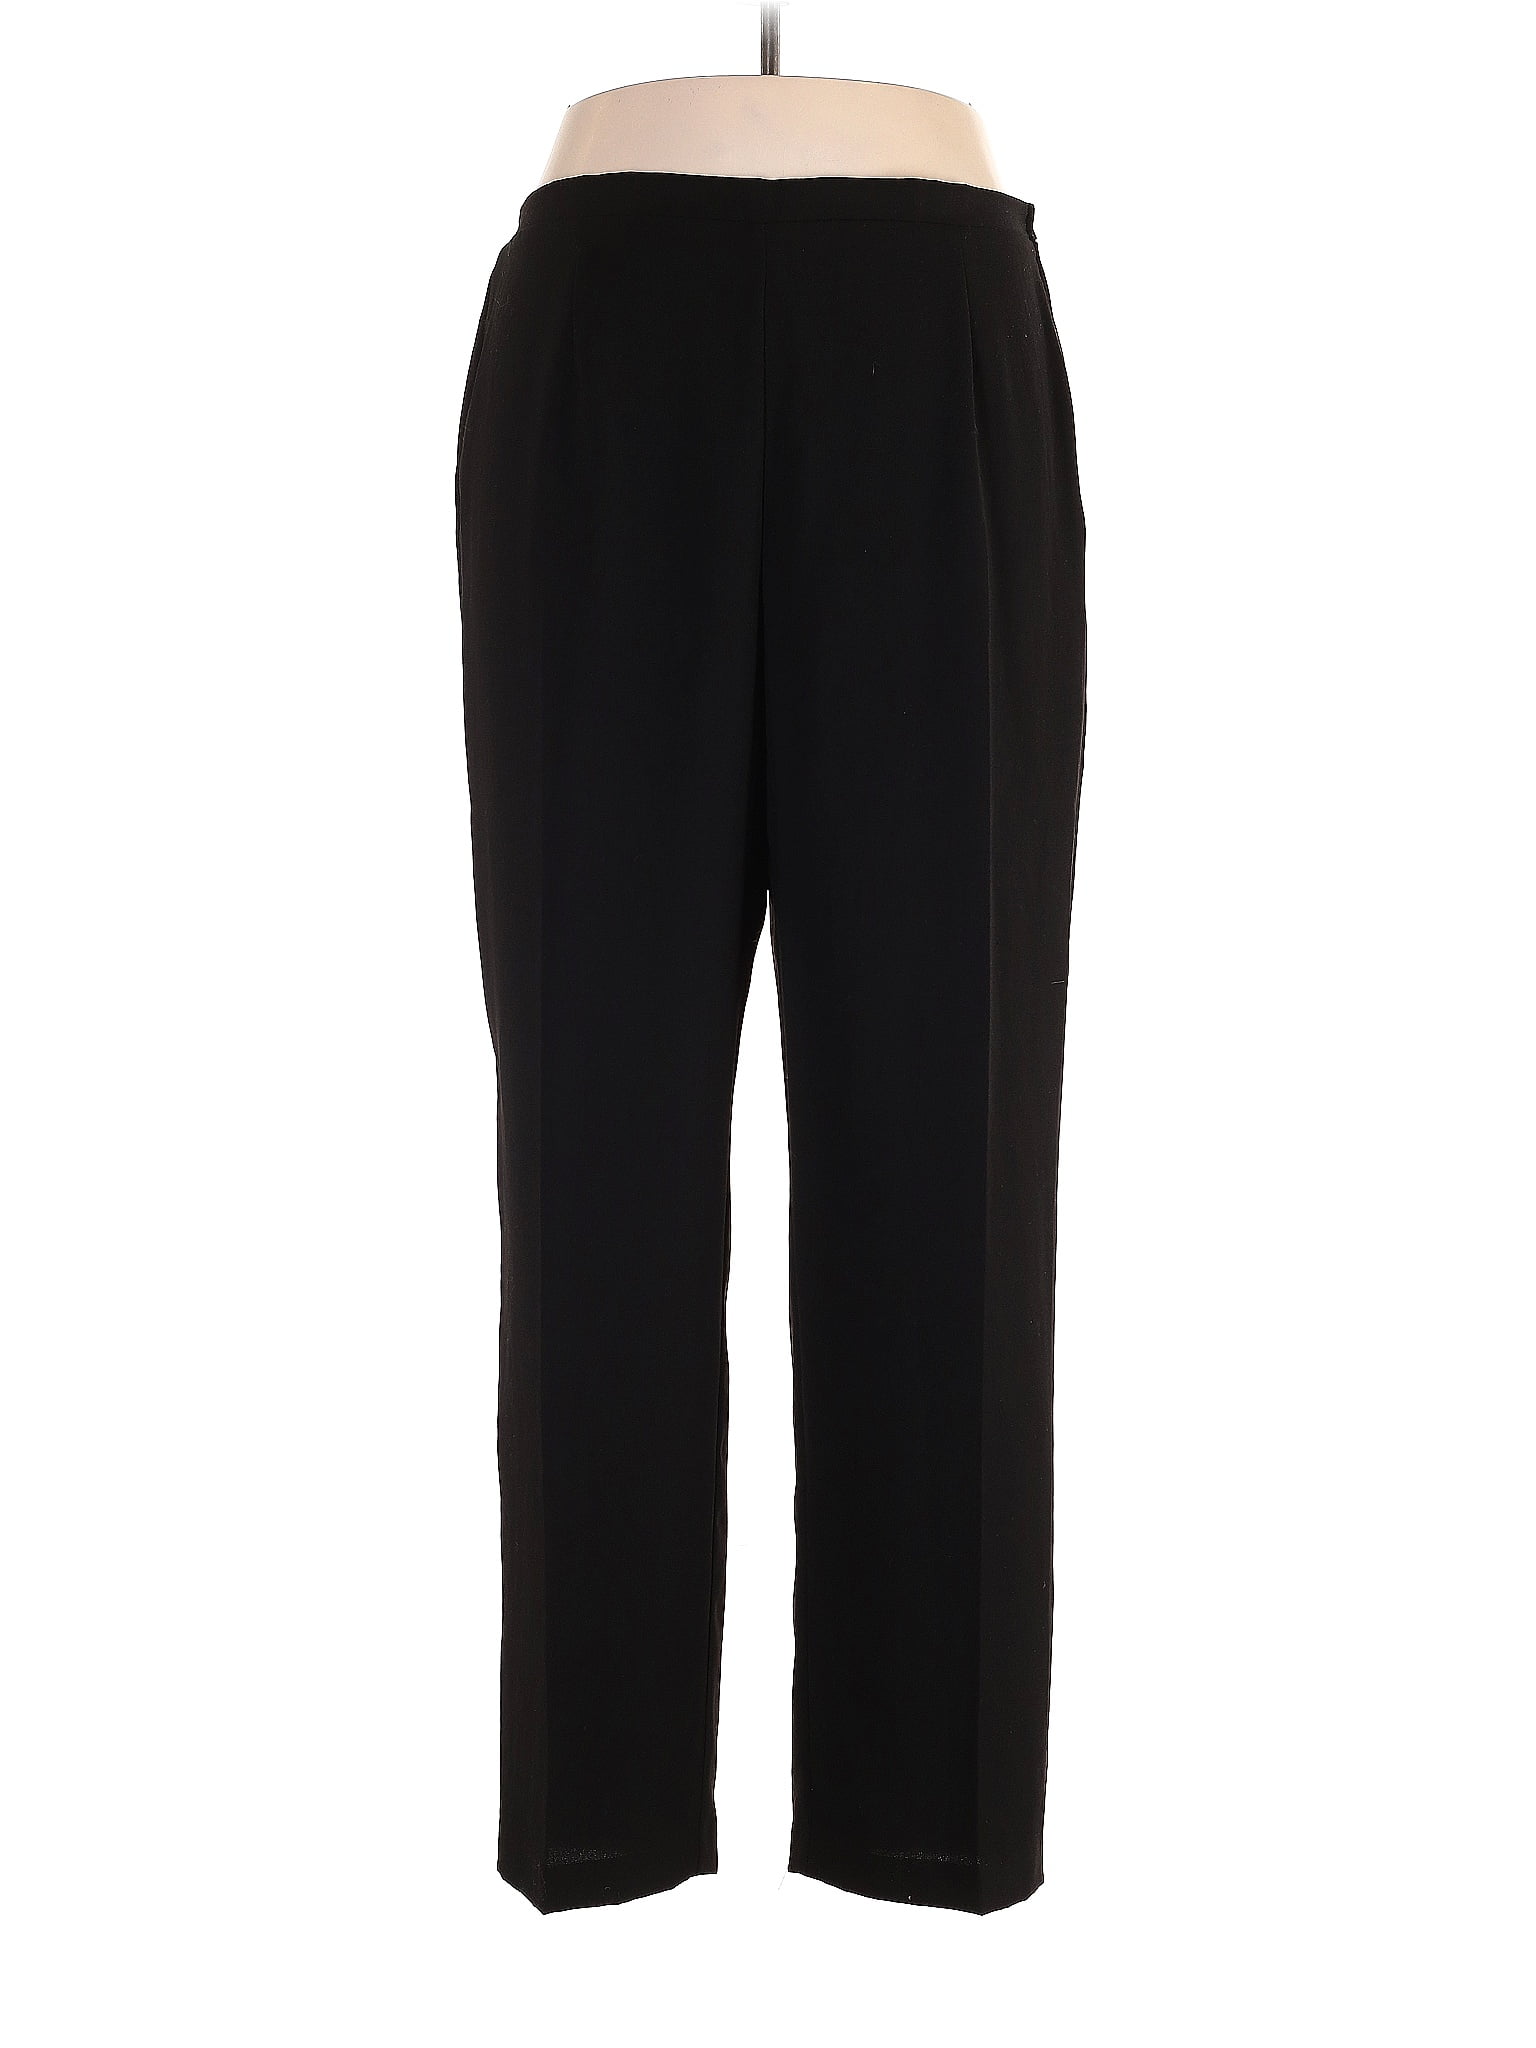 sag harbor womens plus pull on pants from